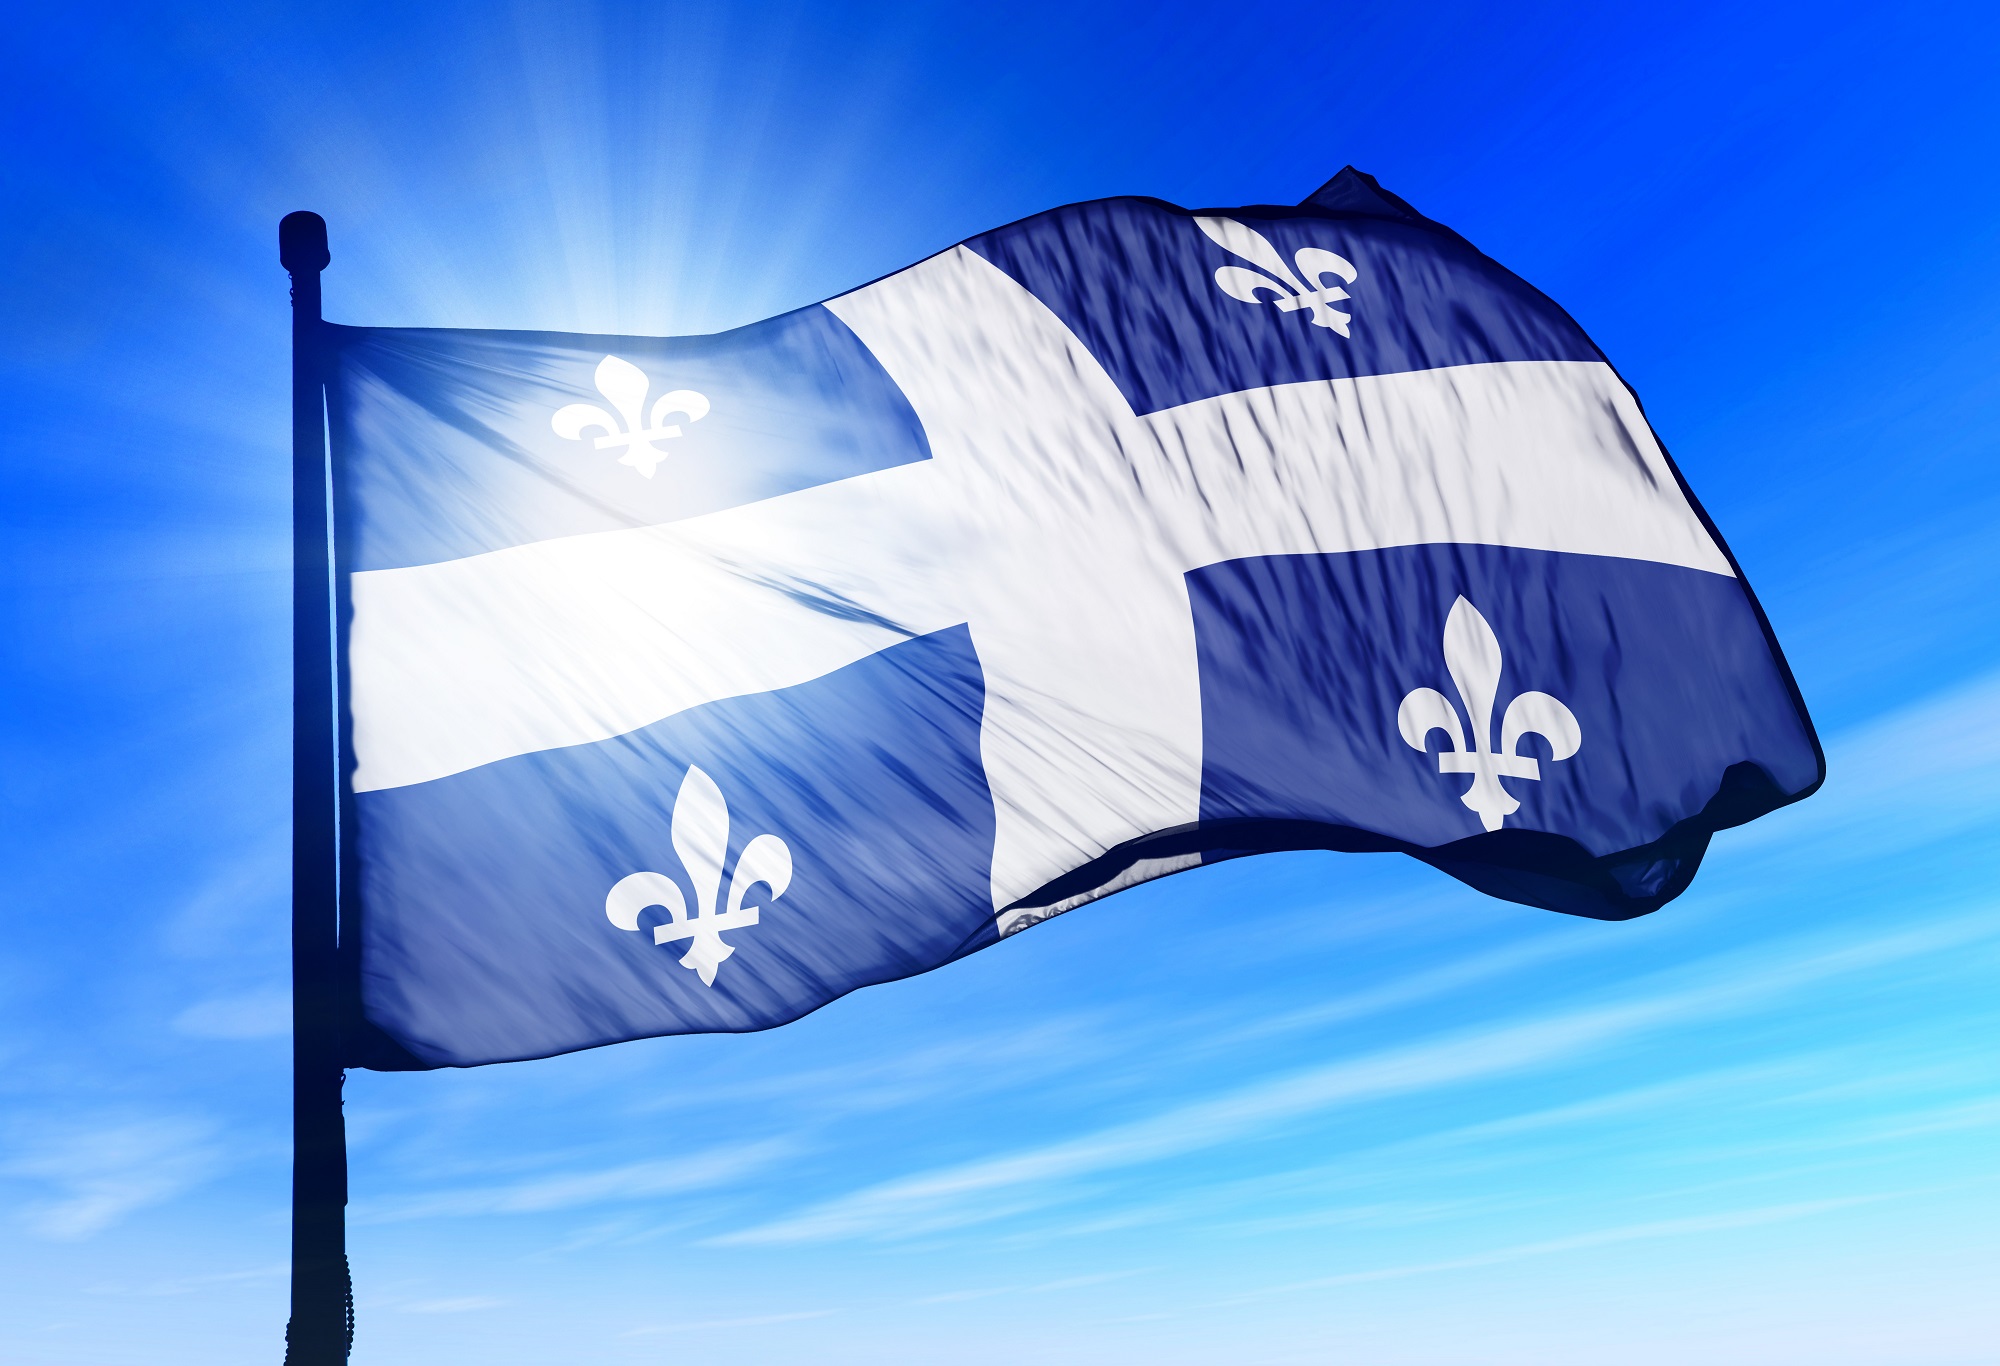 The flag of Quebec, Canada, mounted on a flagpole.